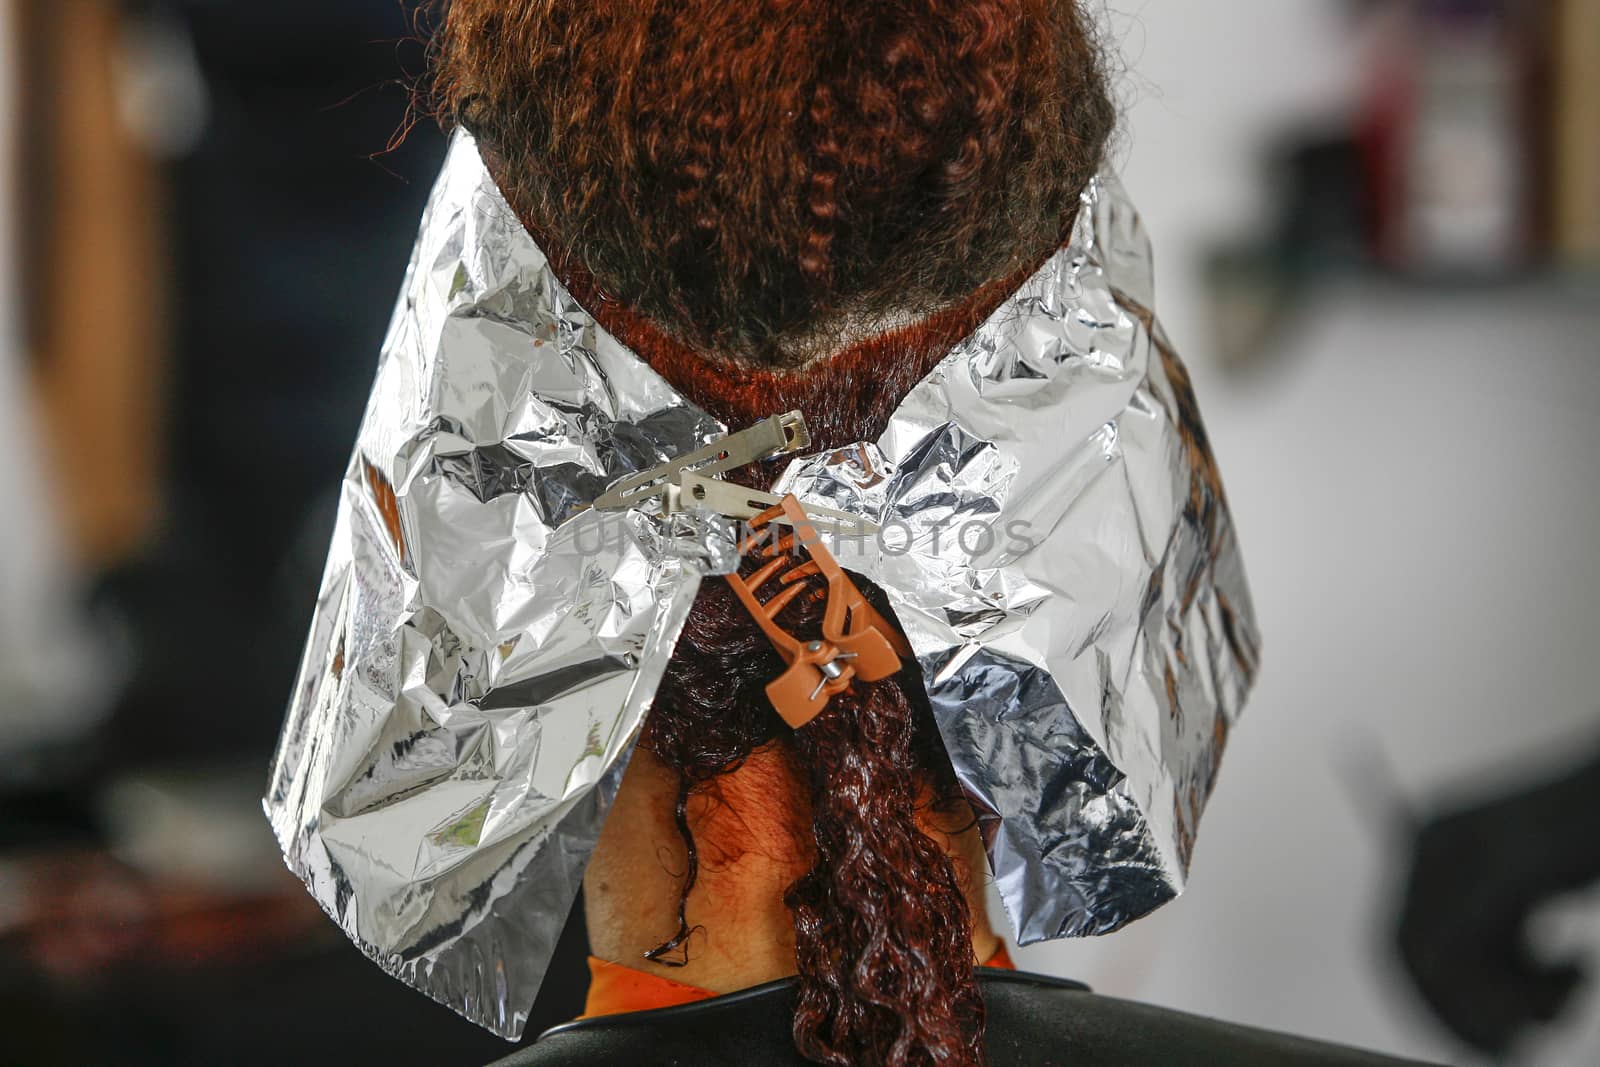 Close-up of the head of a woman in the process of getting her hair dyed by her beautician